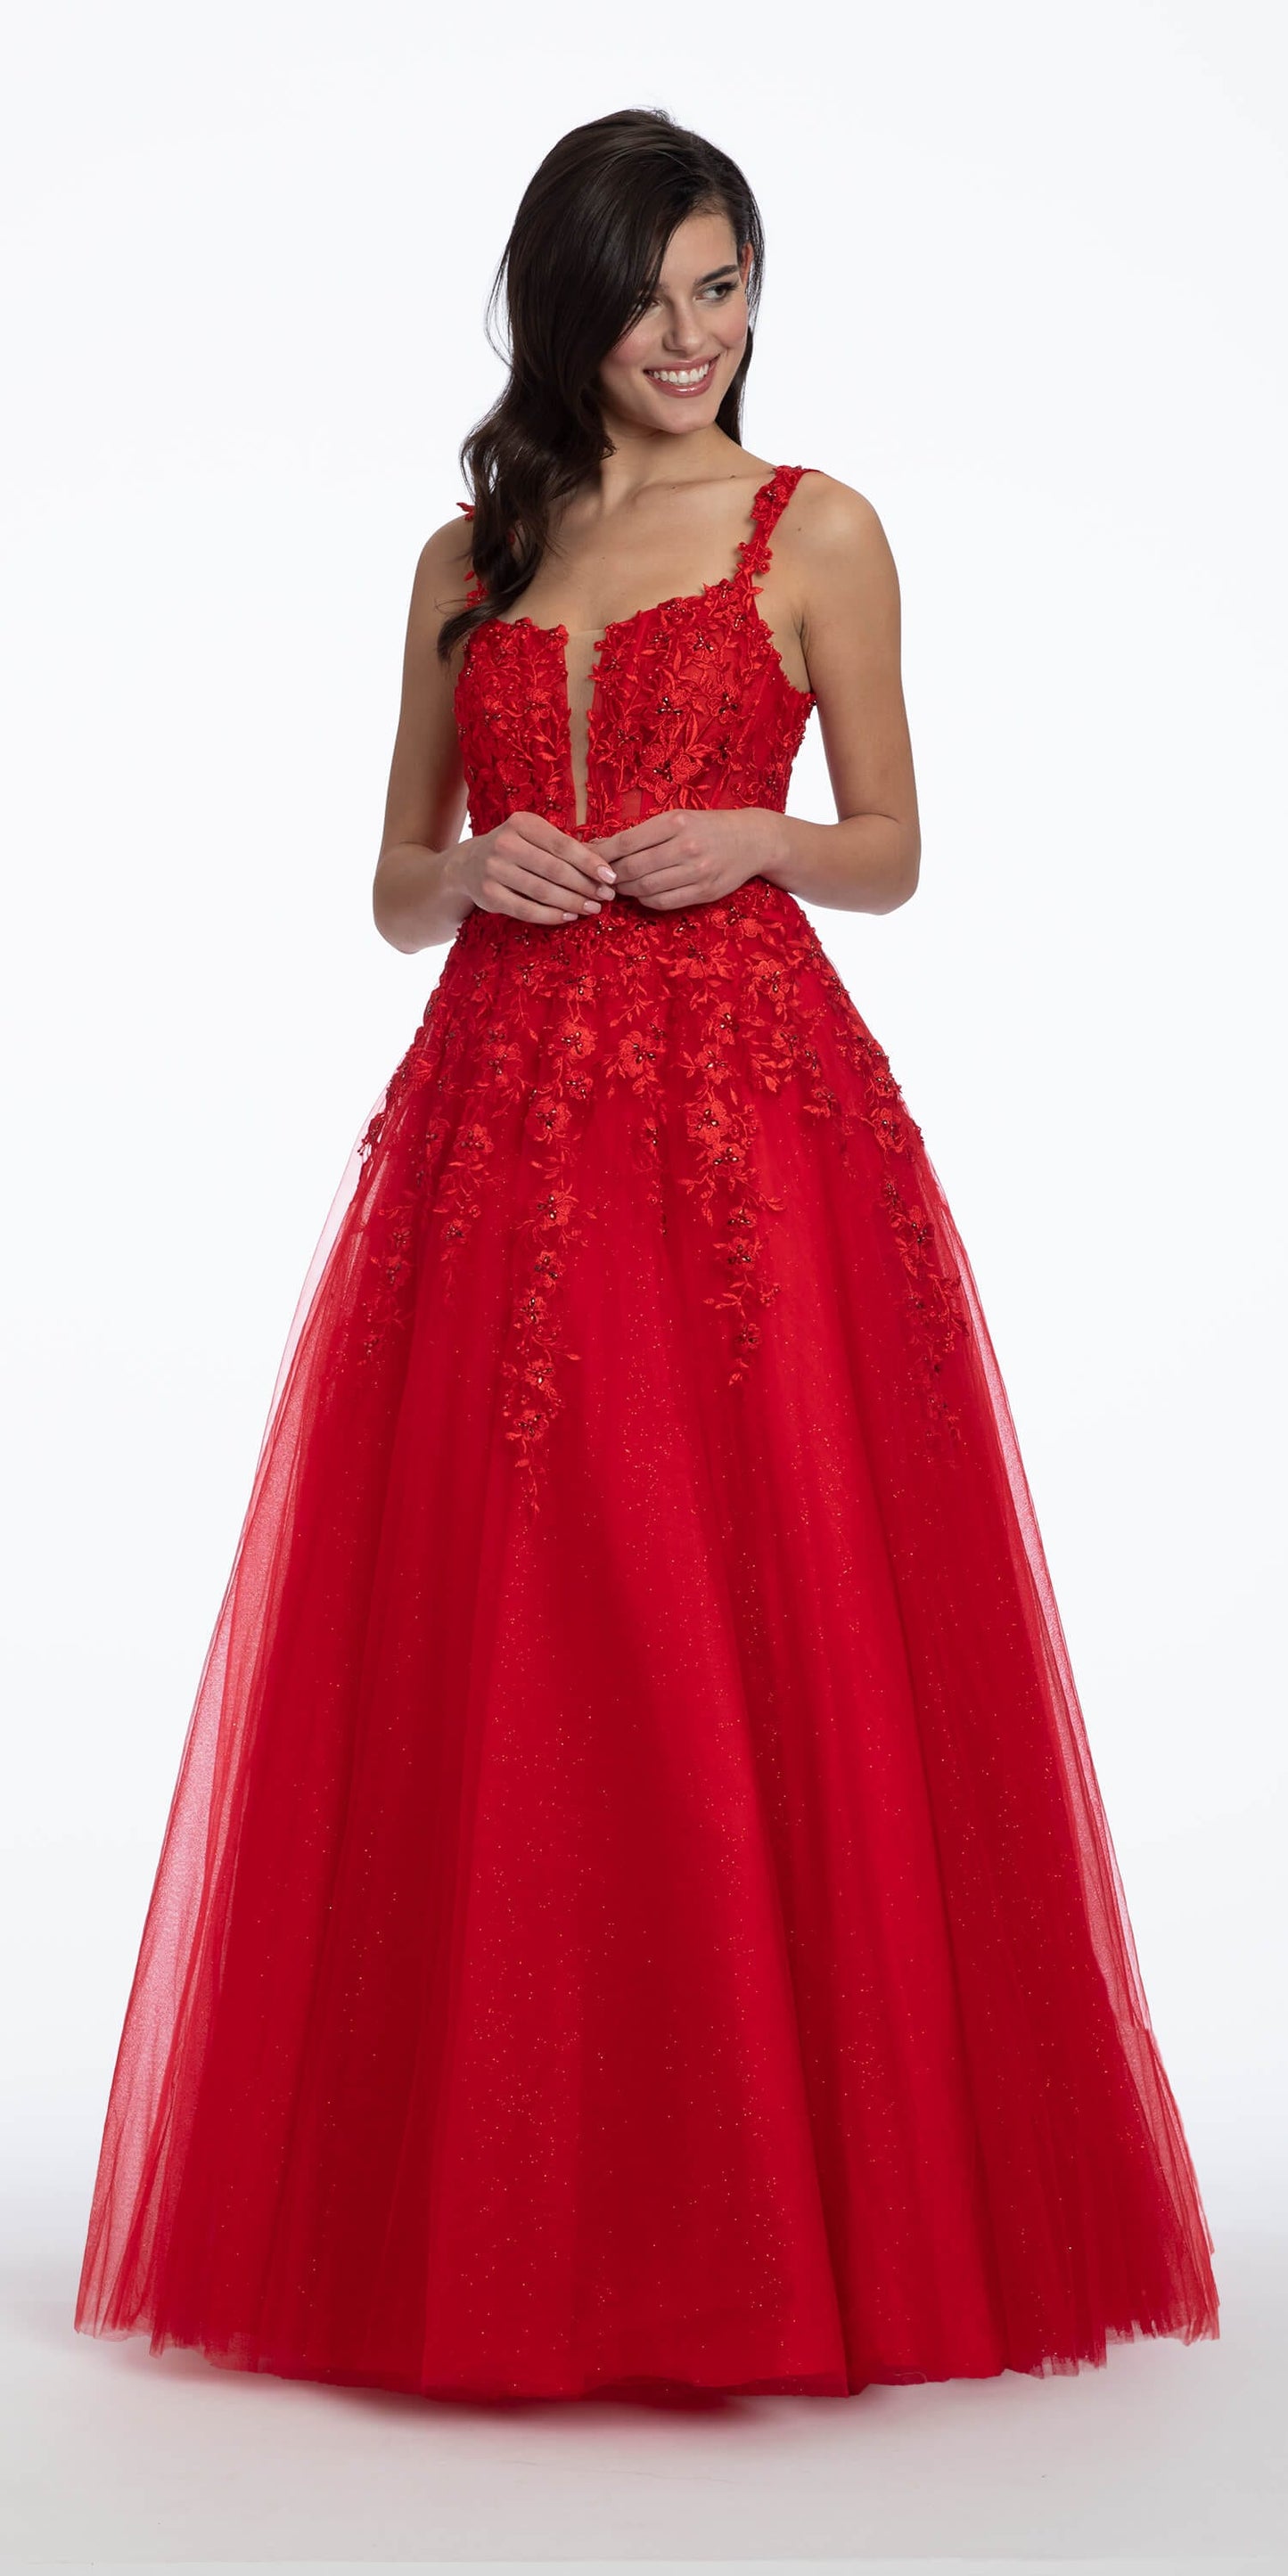 Camille La Vie Embroidered Flower Tulle Ballgown missy / 4 / red